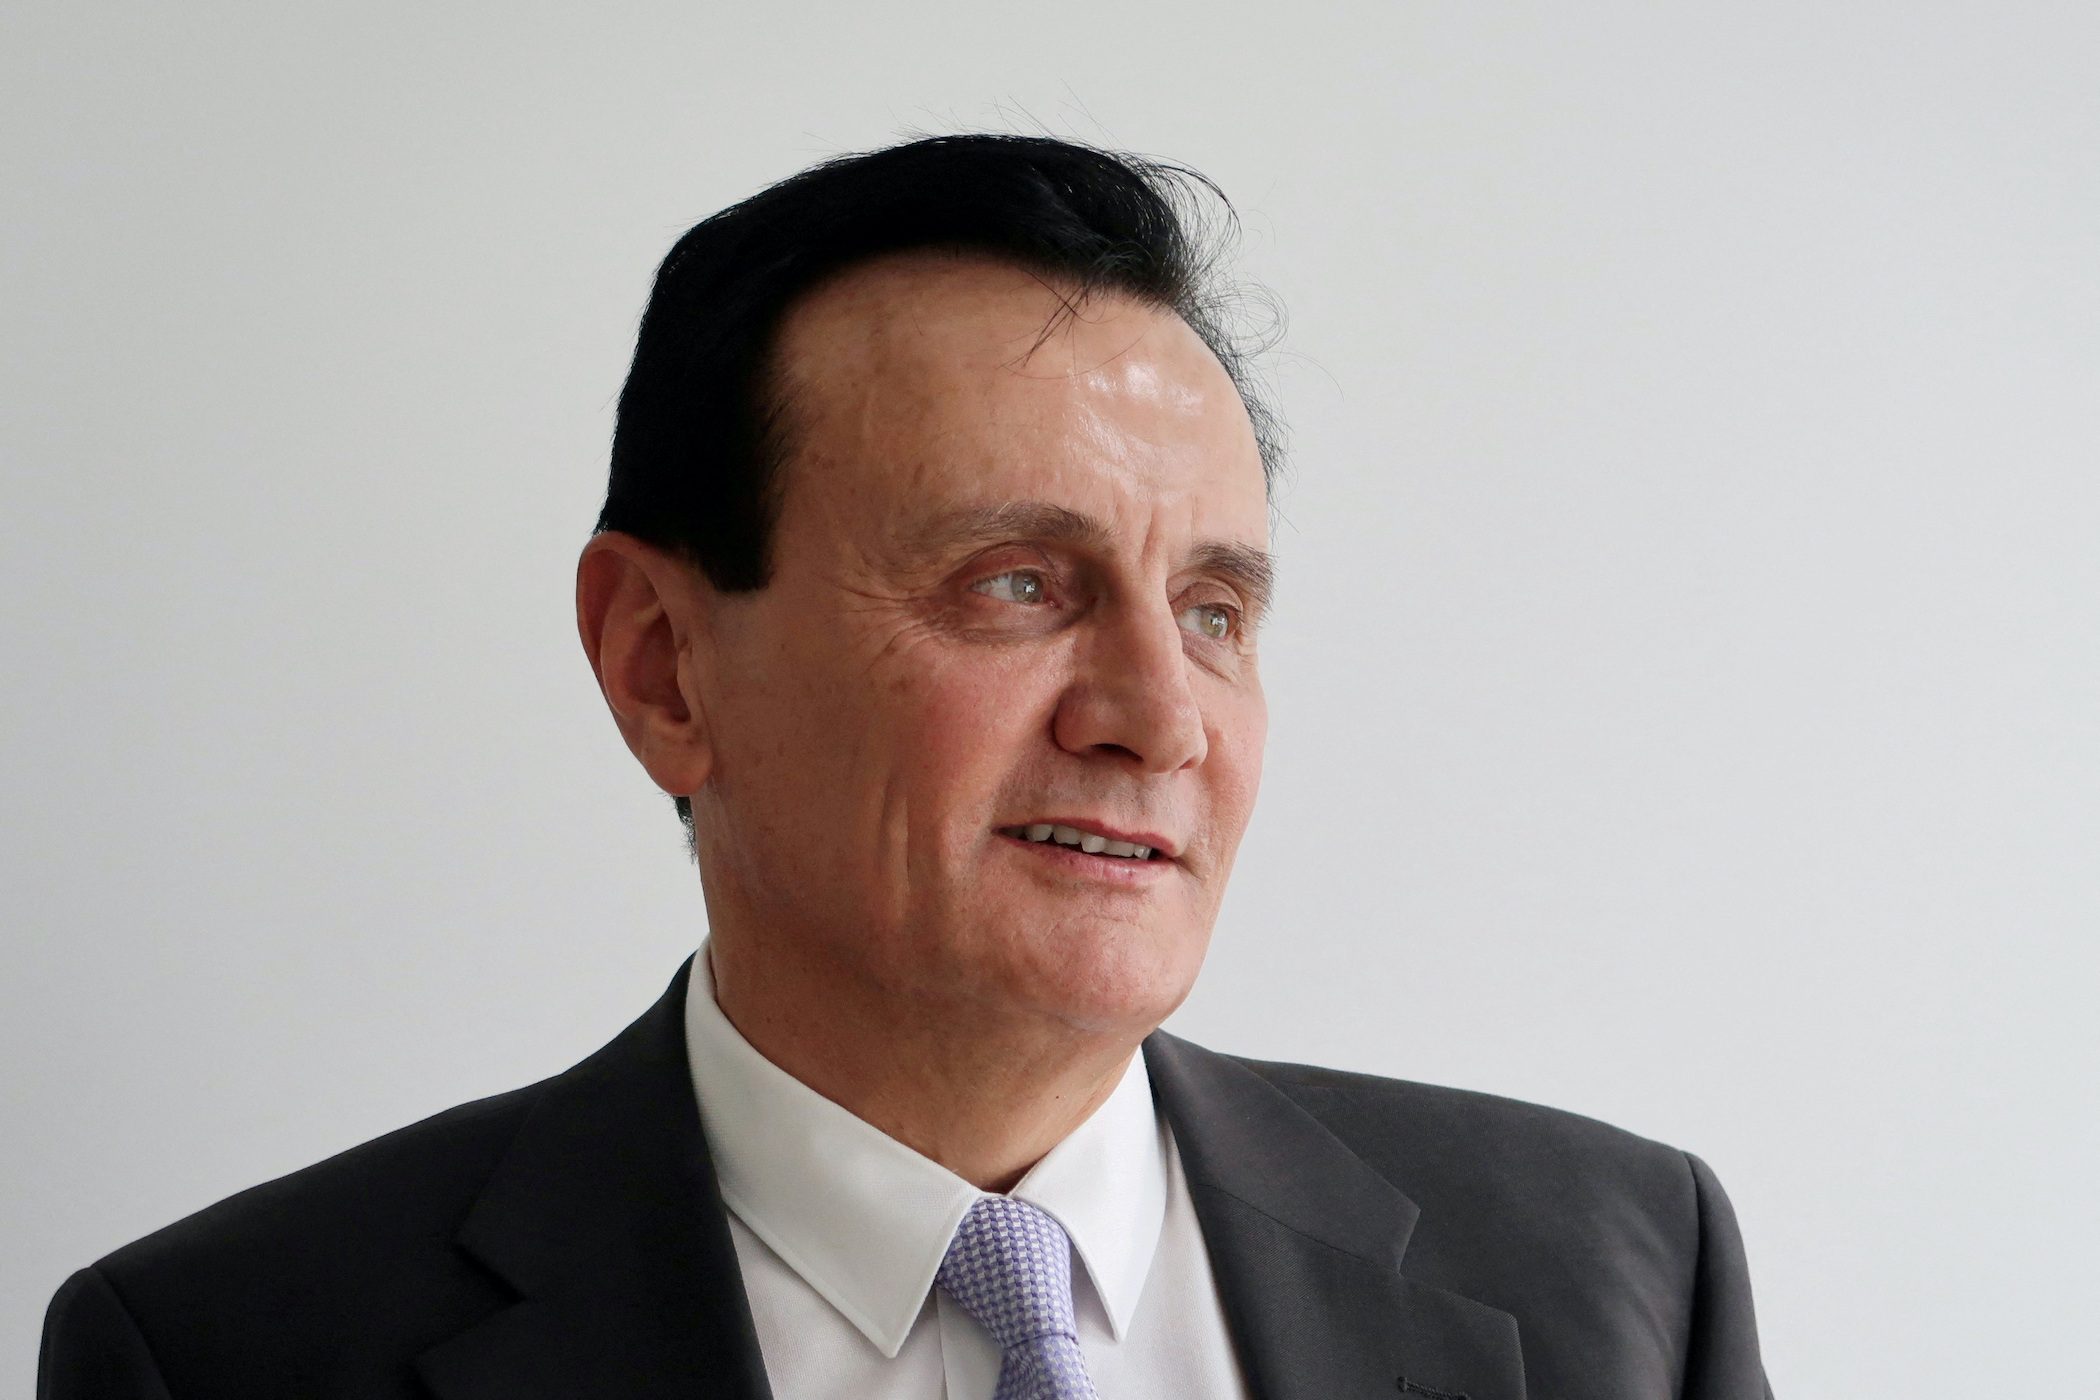 AstraZeneca may not stay in vaccines, but CEO has no COVID-19 regrets